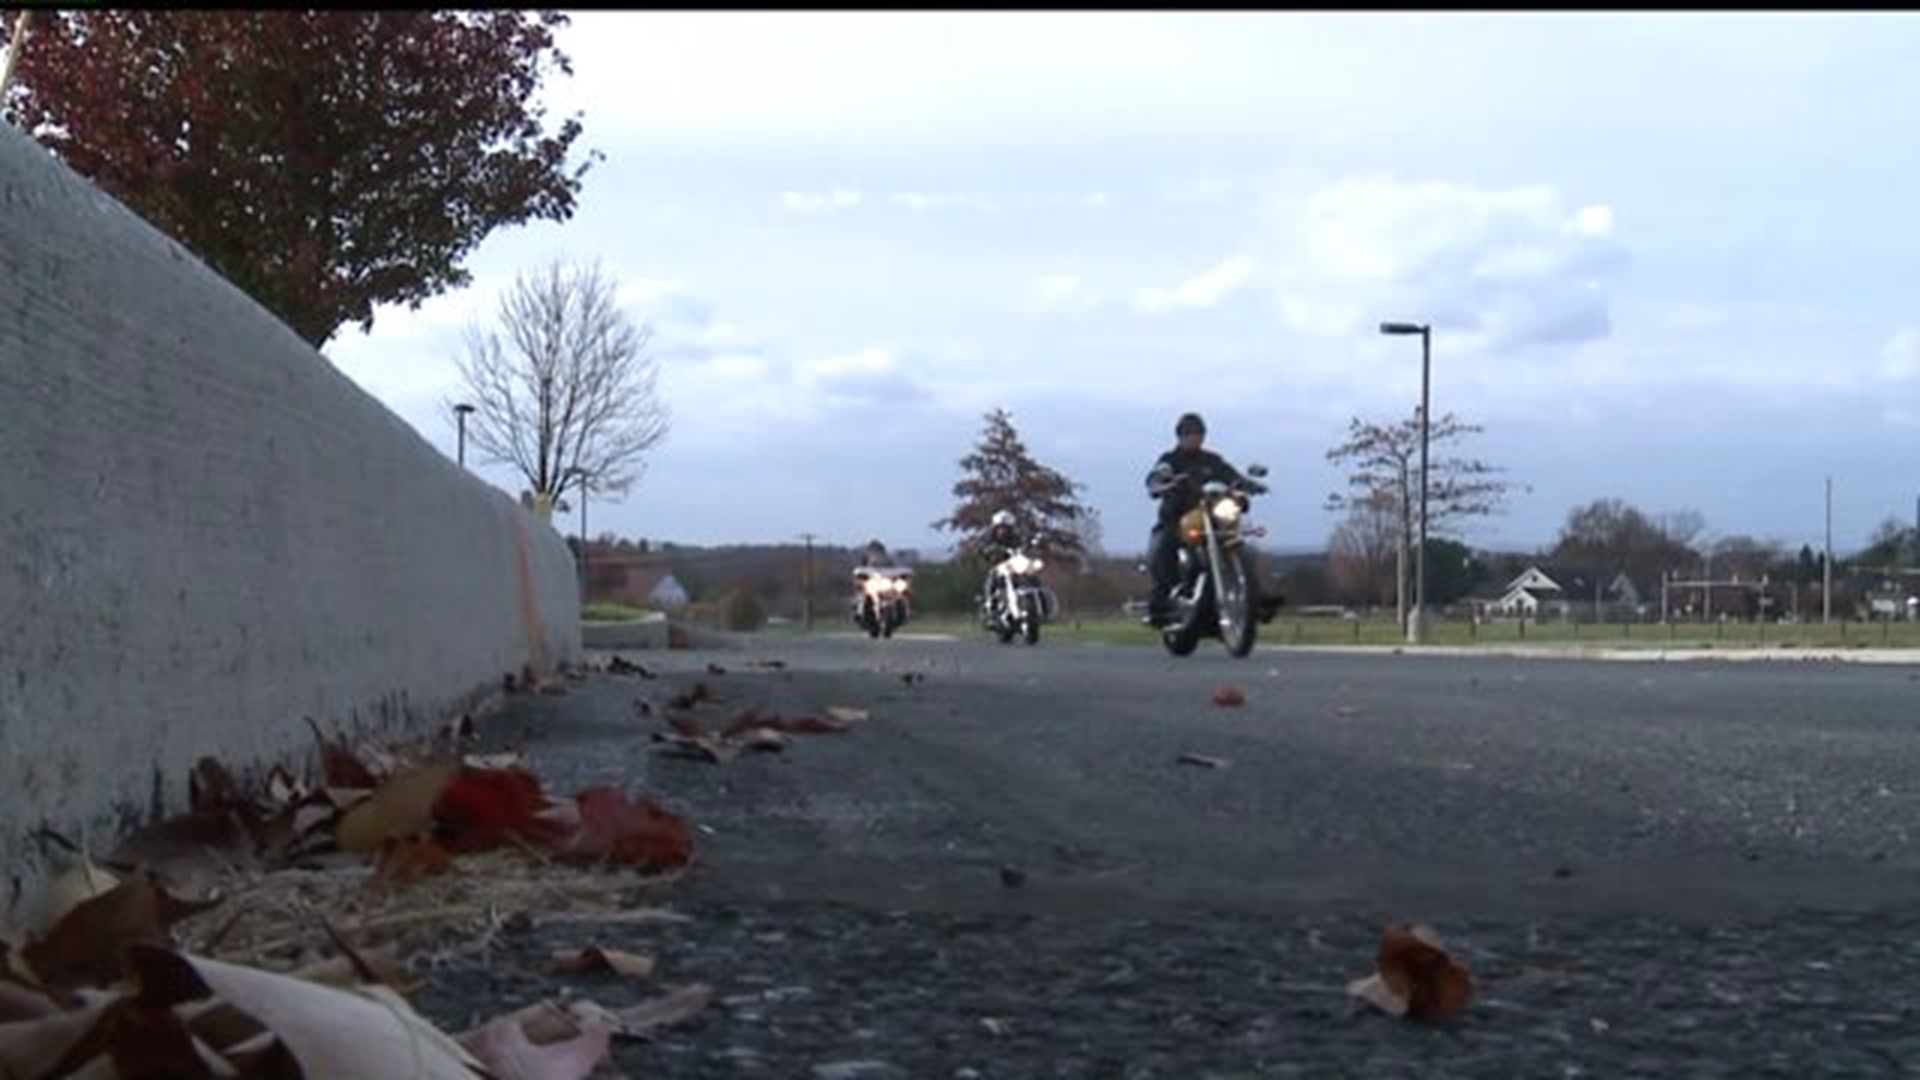 Over five hundred bikers help deliver toys to kids in the hospital